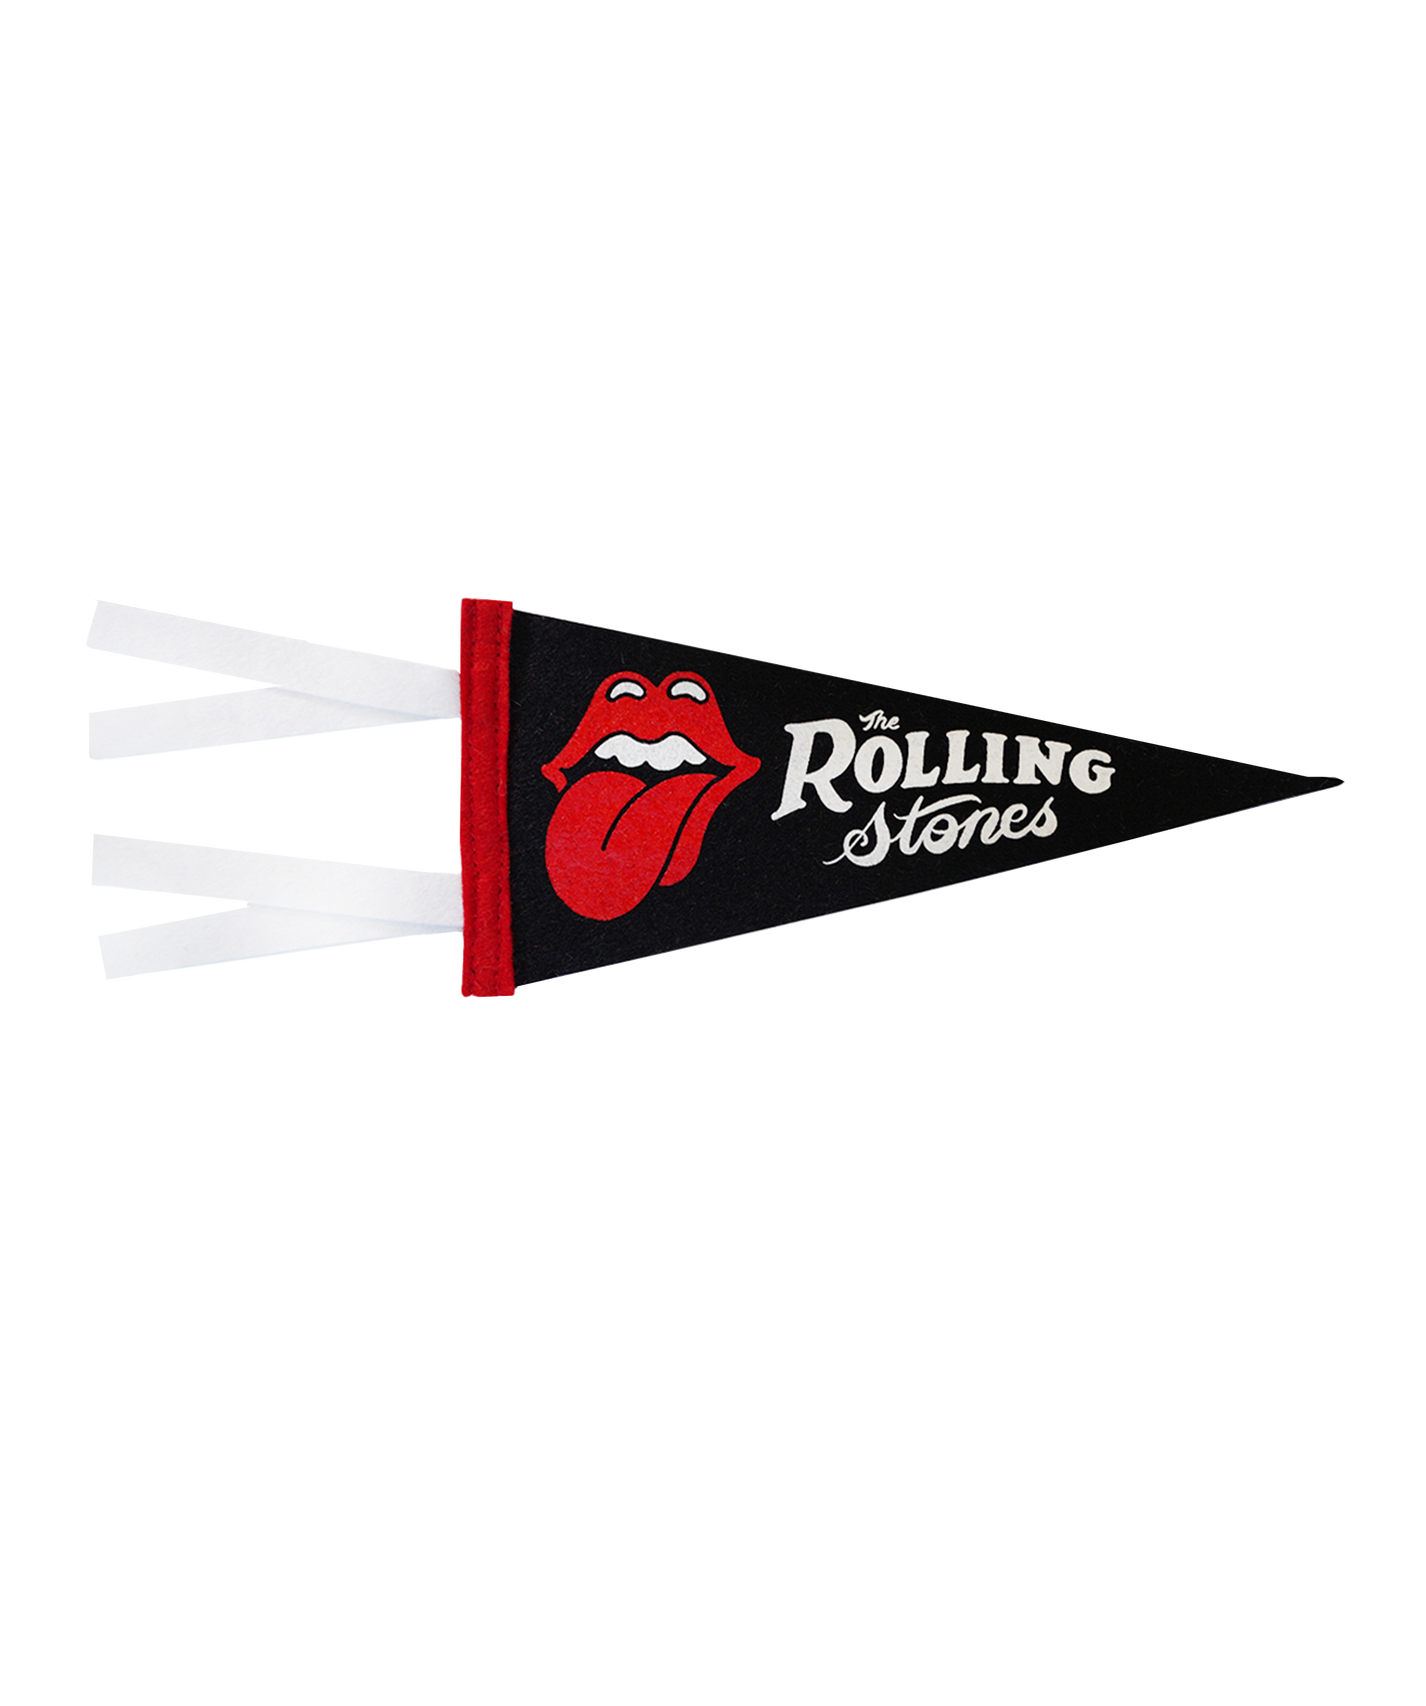 THE ROLLING STONES Mini Pennant by Oxford Pennant